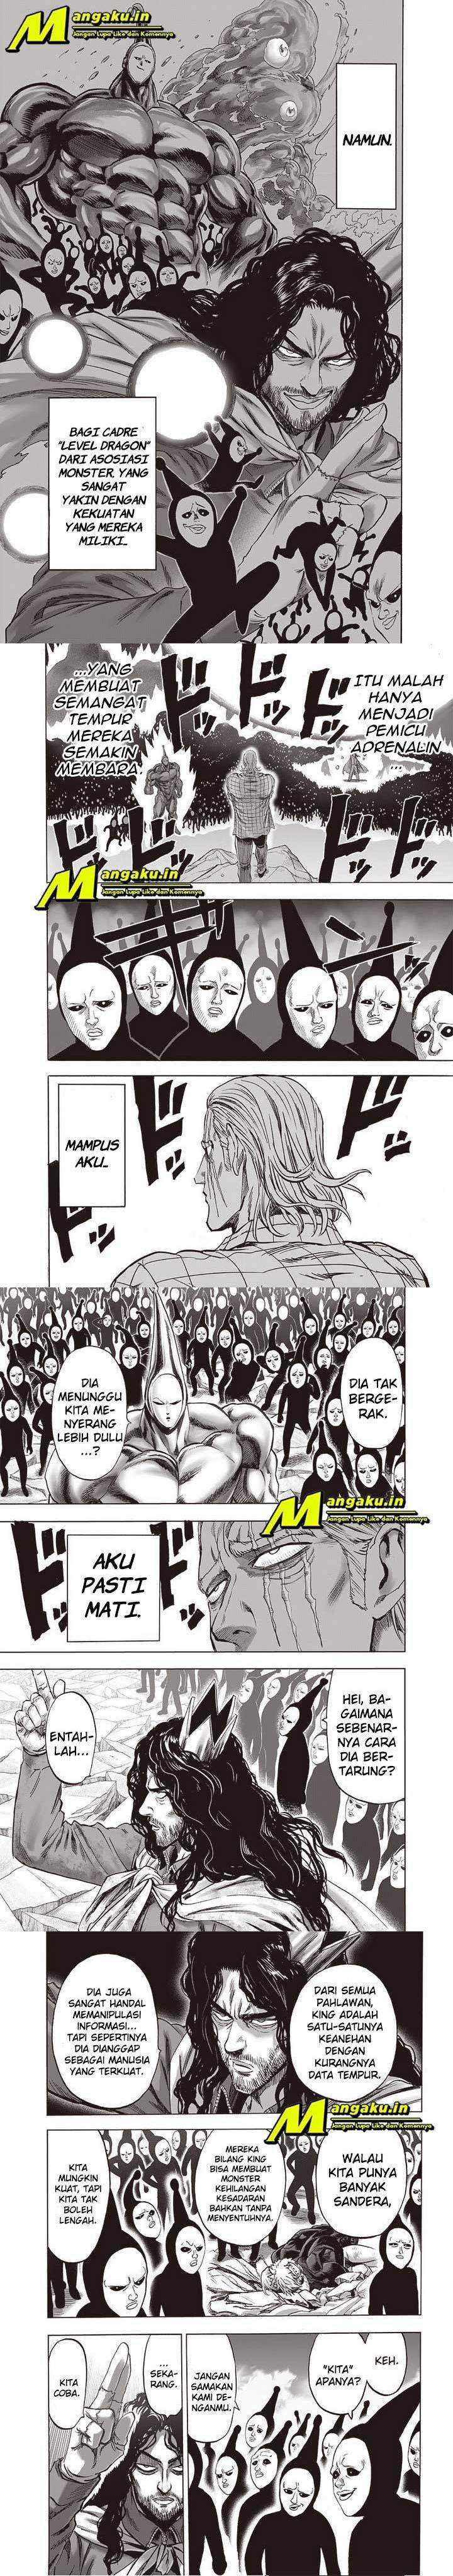 One Punch Man Chapter 206 2